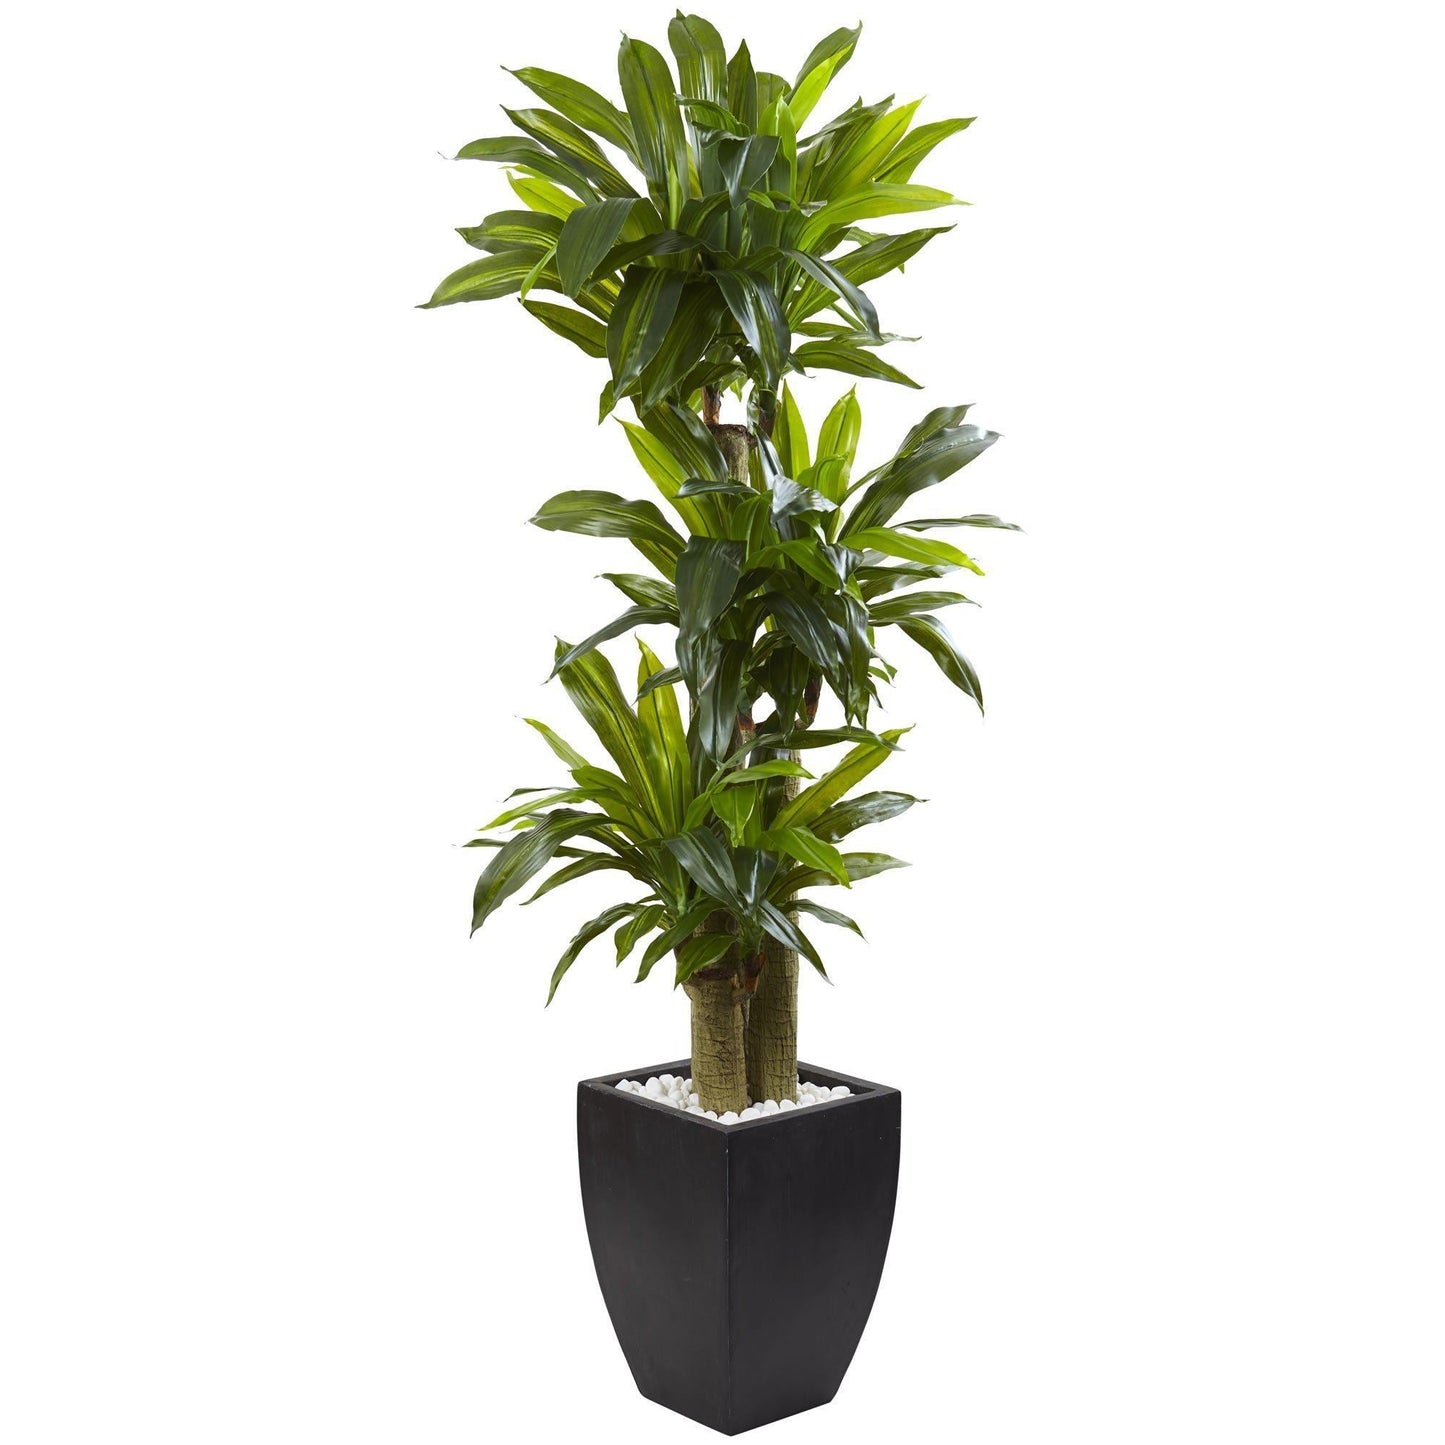 5.5’ Corn Stalk Dracaena with Black Wash Planter by Nearly Natural